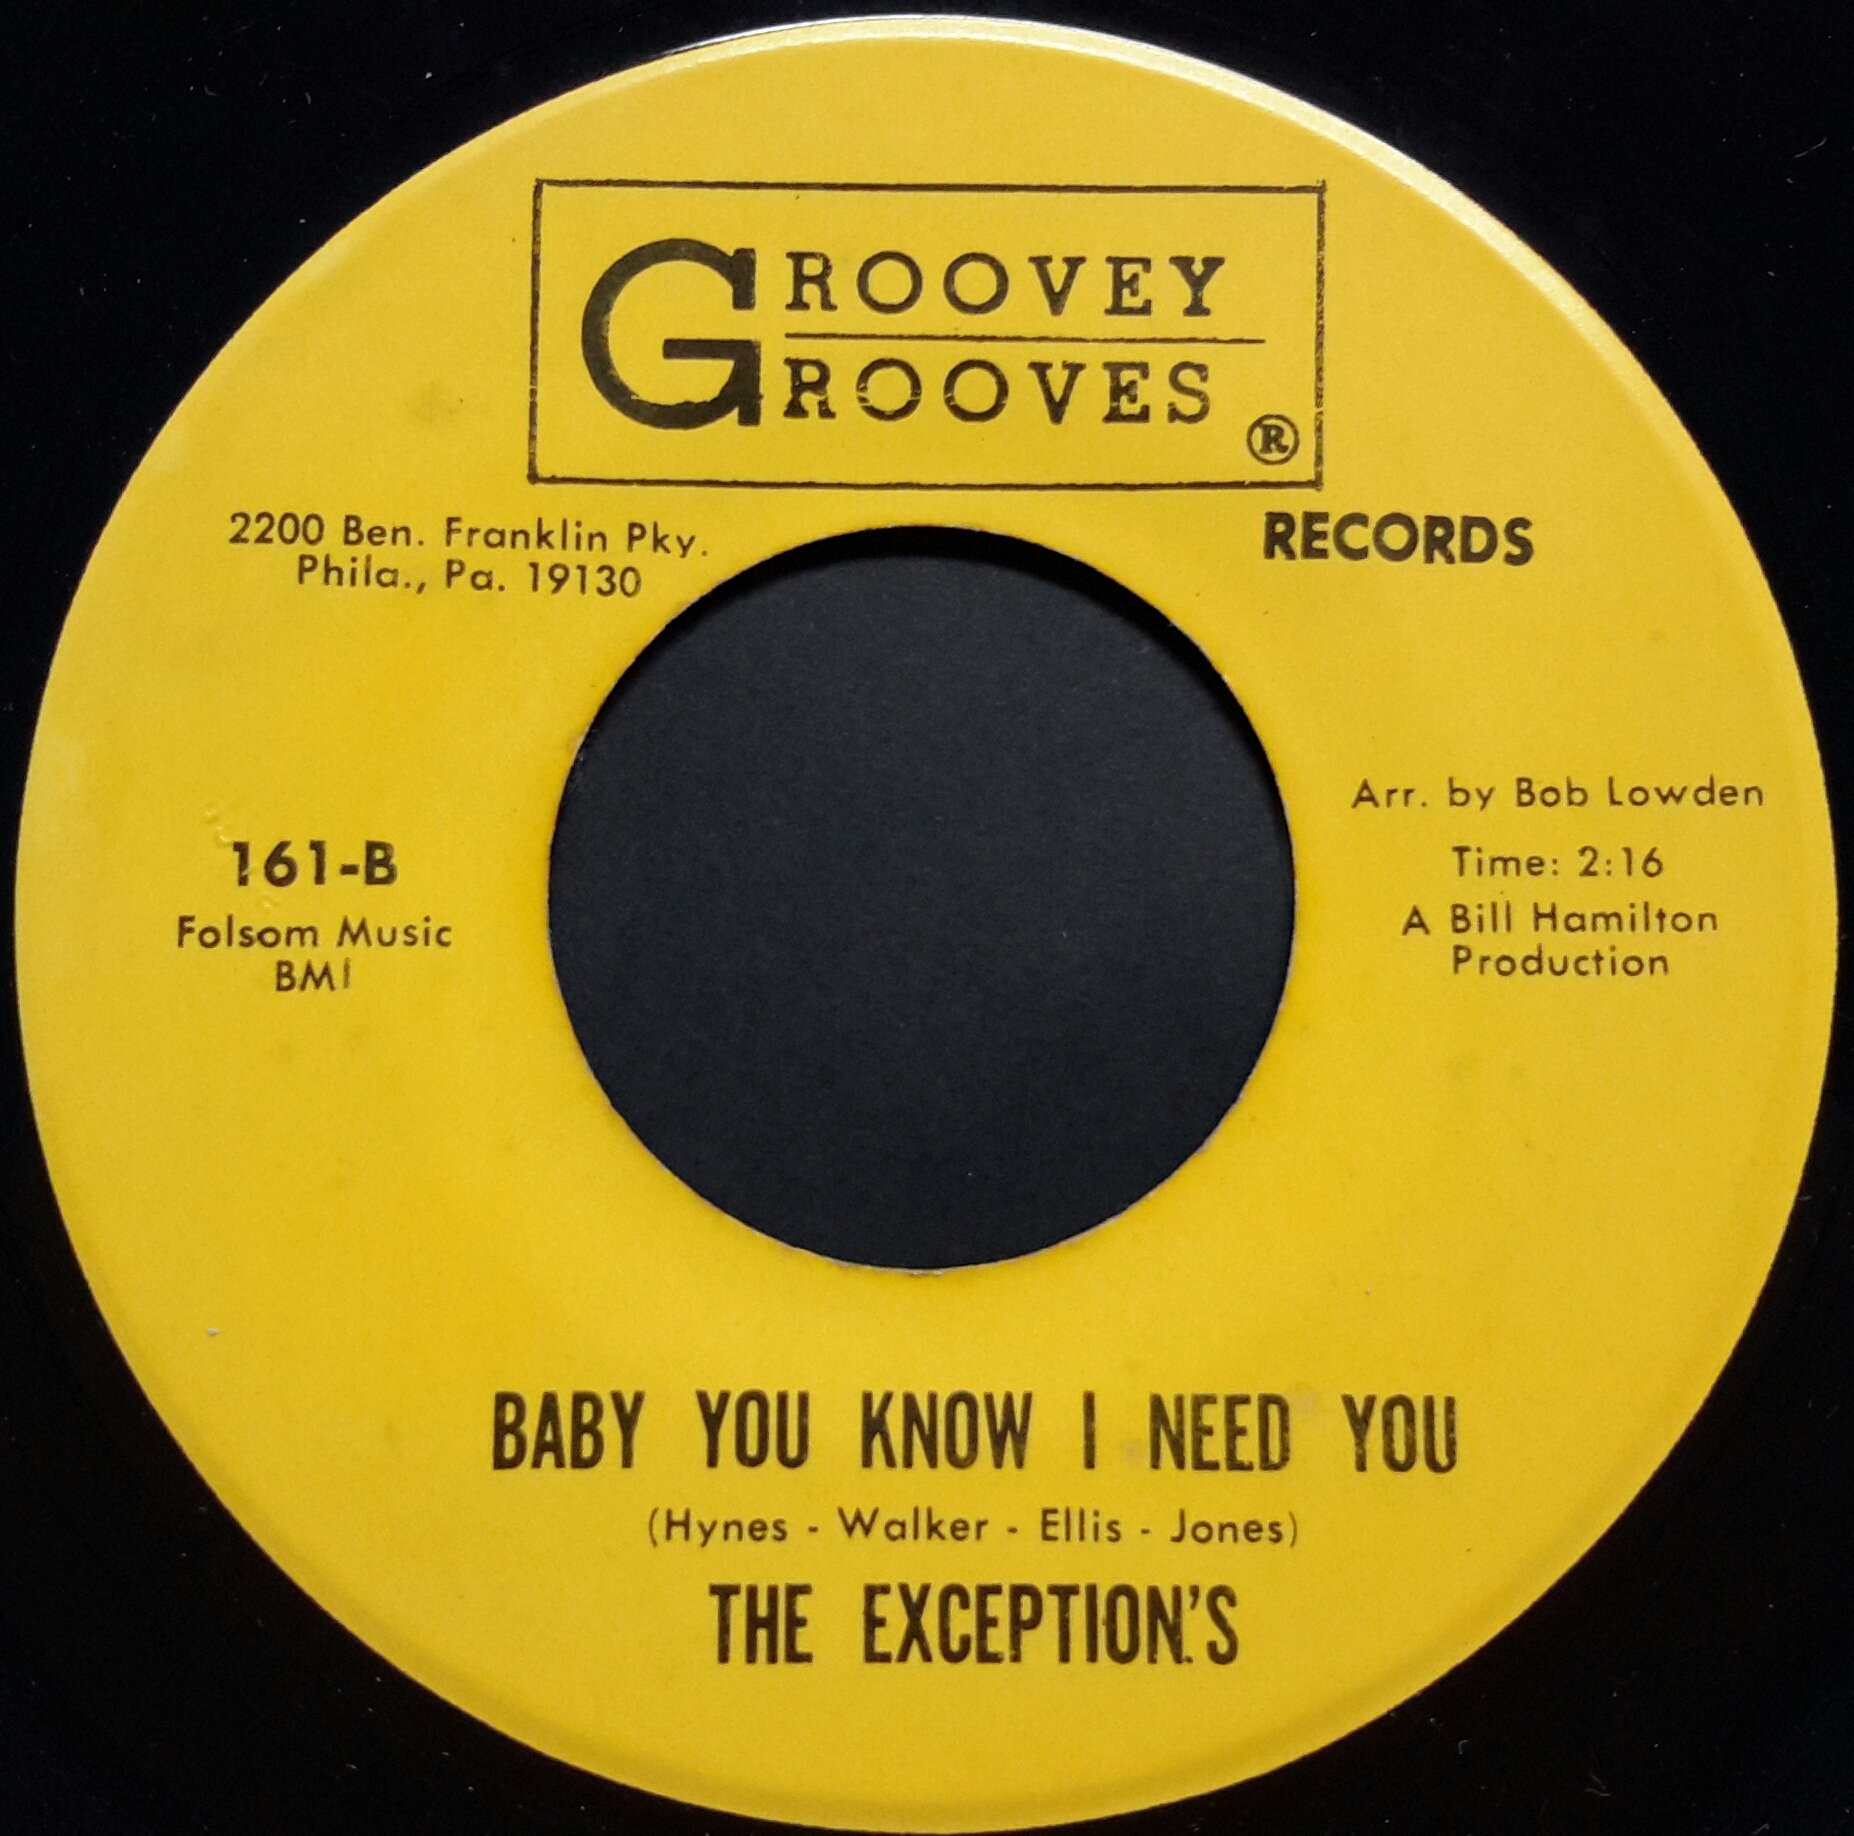 [SOLD] 2 x GROOVEY GROOVES 45's for sale -Norwood Long & Exceptions ...